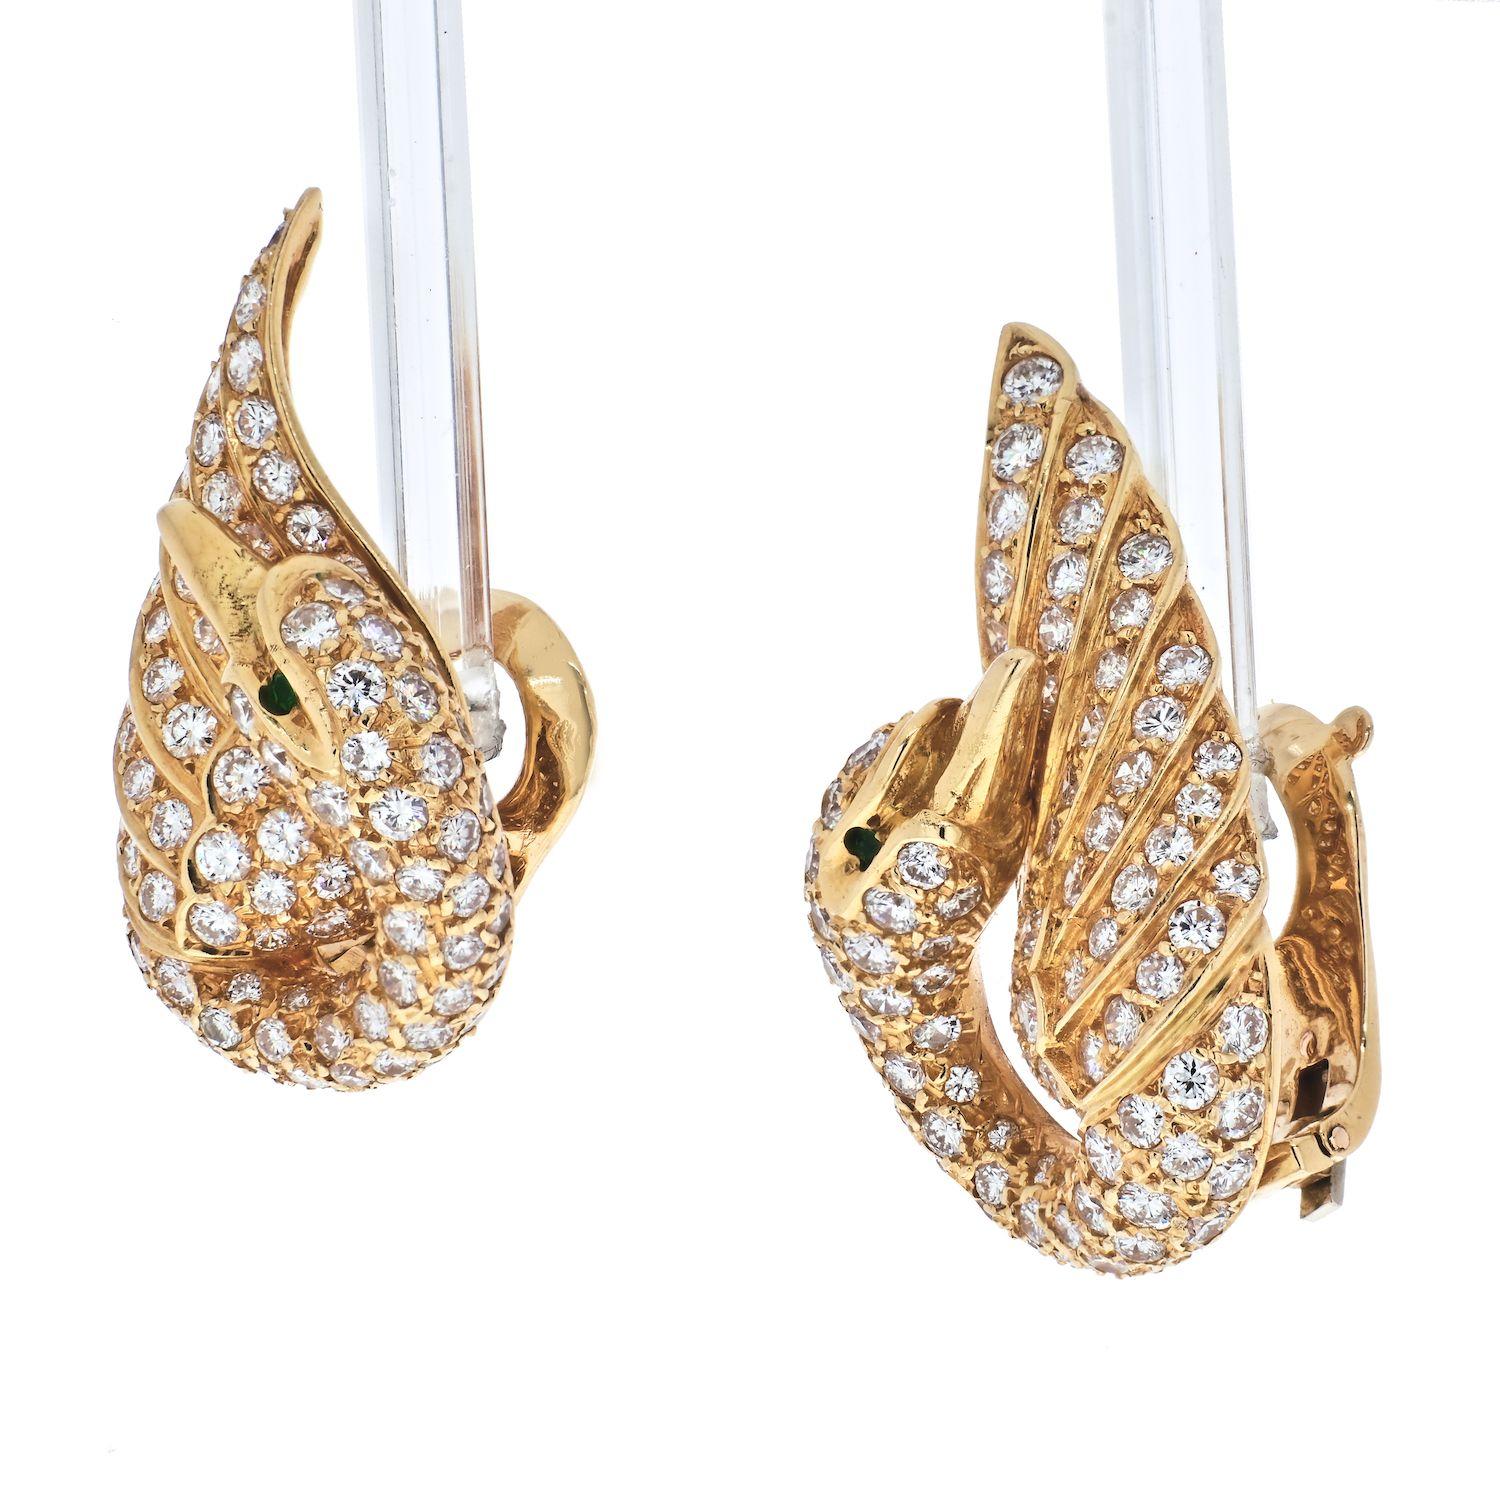 Each designed as a circular-cut diamond swan, with a single-cut emerald eye, 1 3/8 ins., with French assay marks for 18k gold.
Princess Grace owned a pair just like them!
Signed Van Cleef & Arpels, numbered. 
